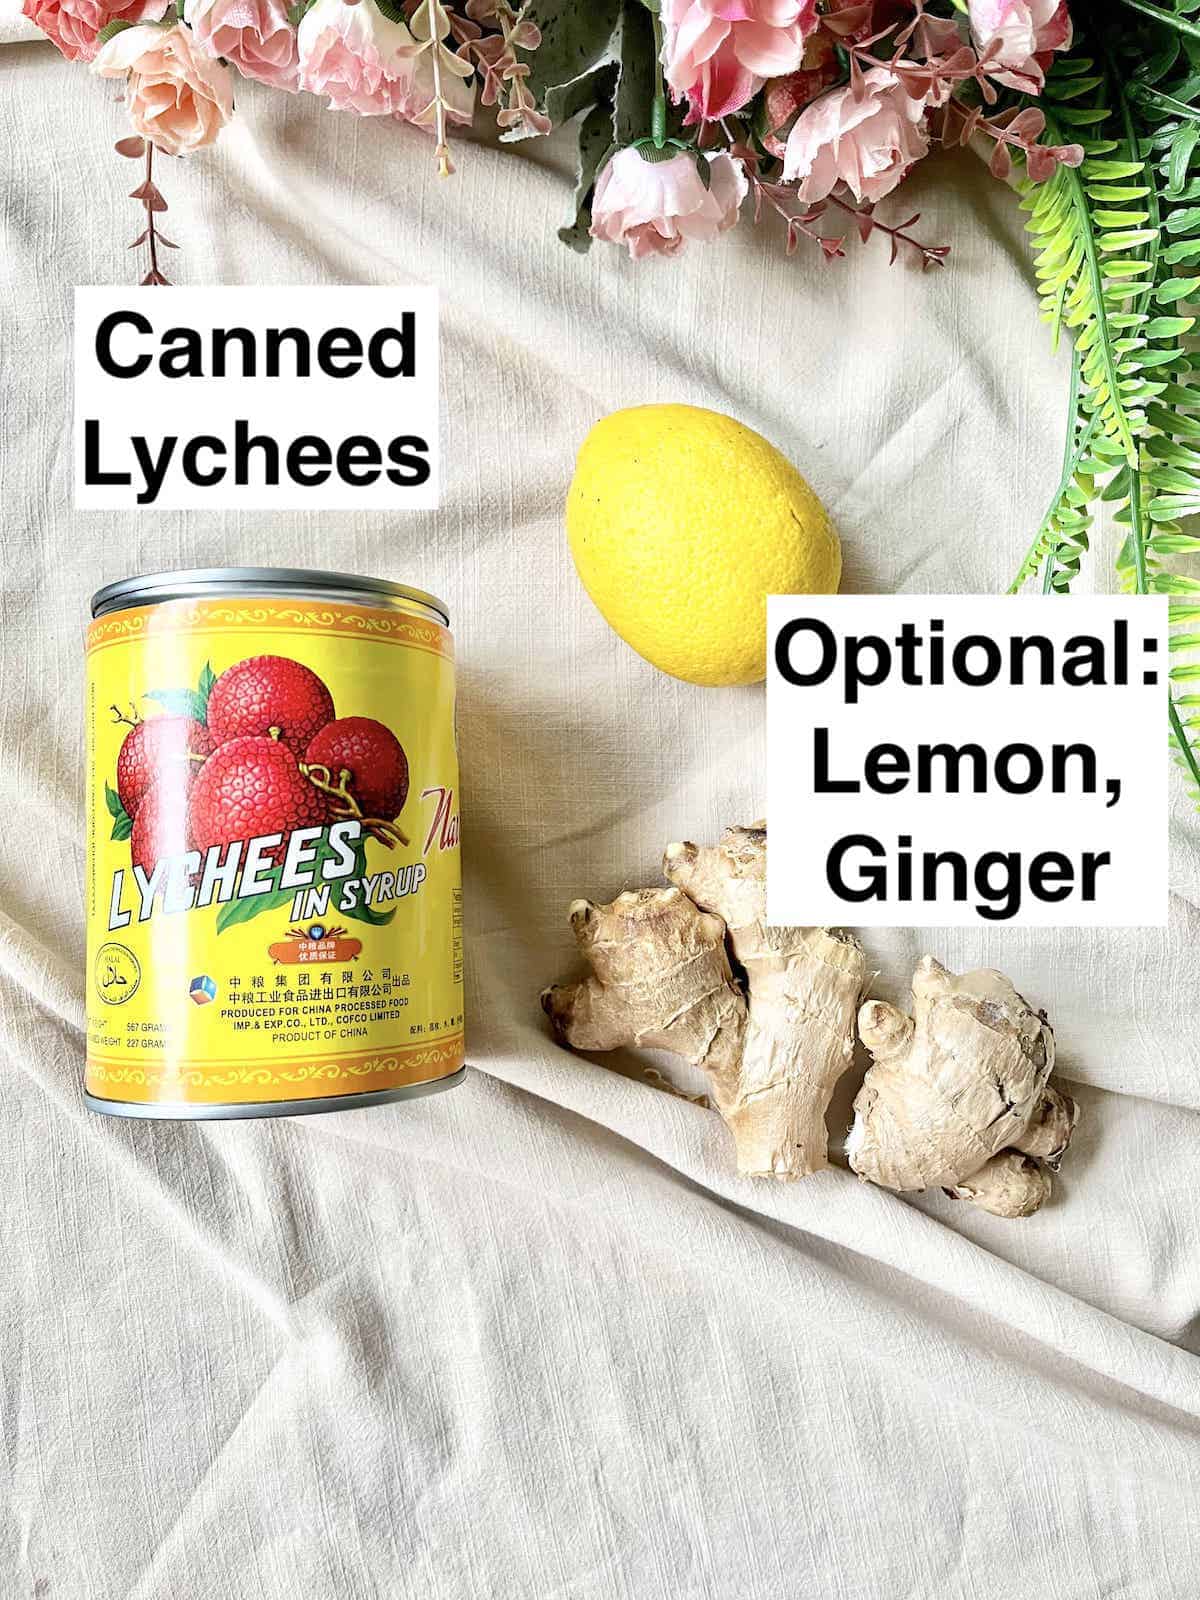 A can of lychees next to a lemon and ginger.